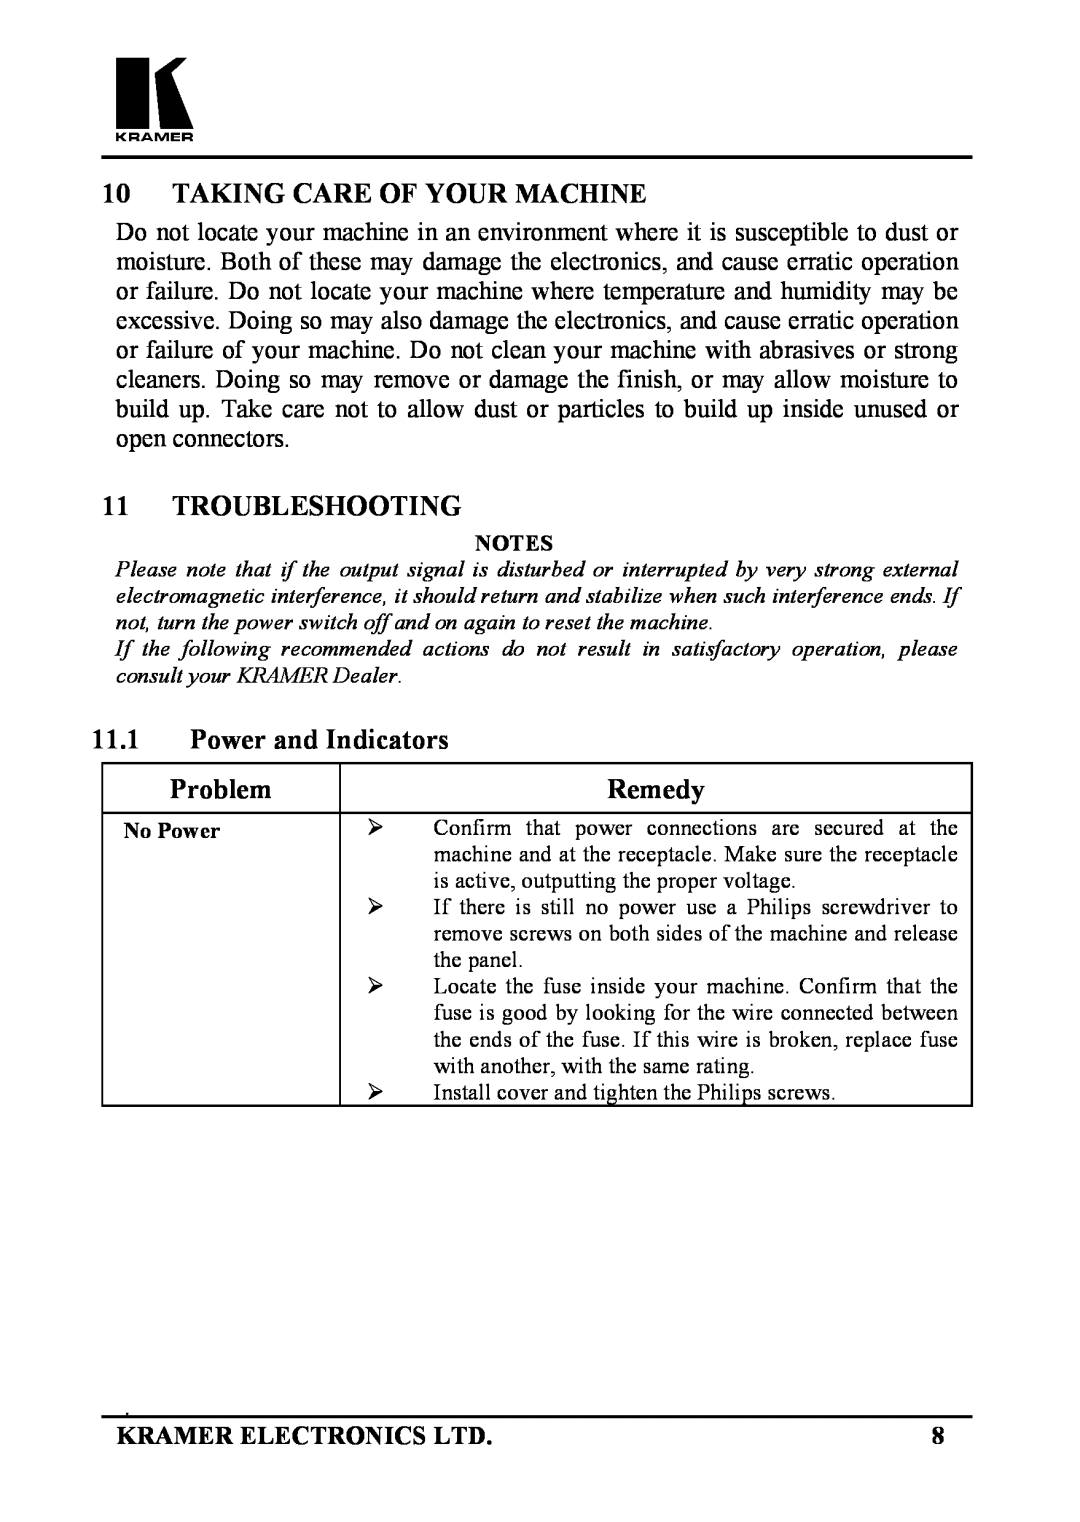 Kramer Electronics 123V user manual Taking Care Of Your Machine, Troubleshooting, Power and Indicators, Problem, Remedy 